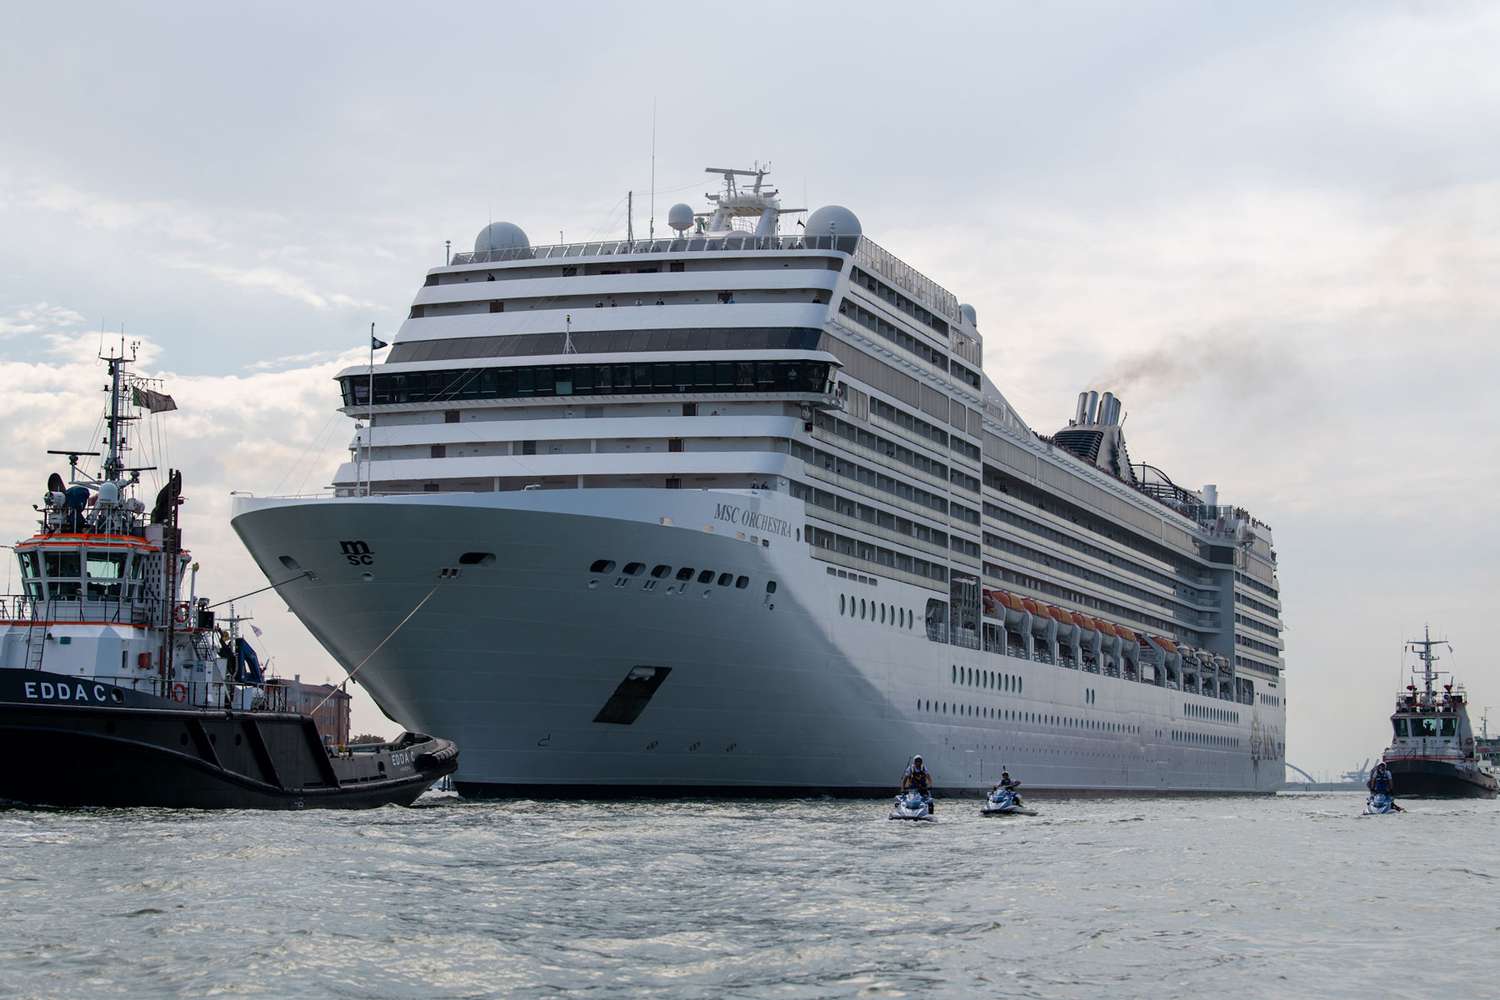 Mixed Reactions As Cruise Ships Returned to Venice's Canals Saturday